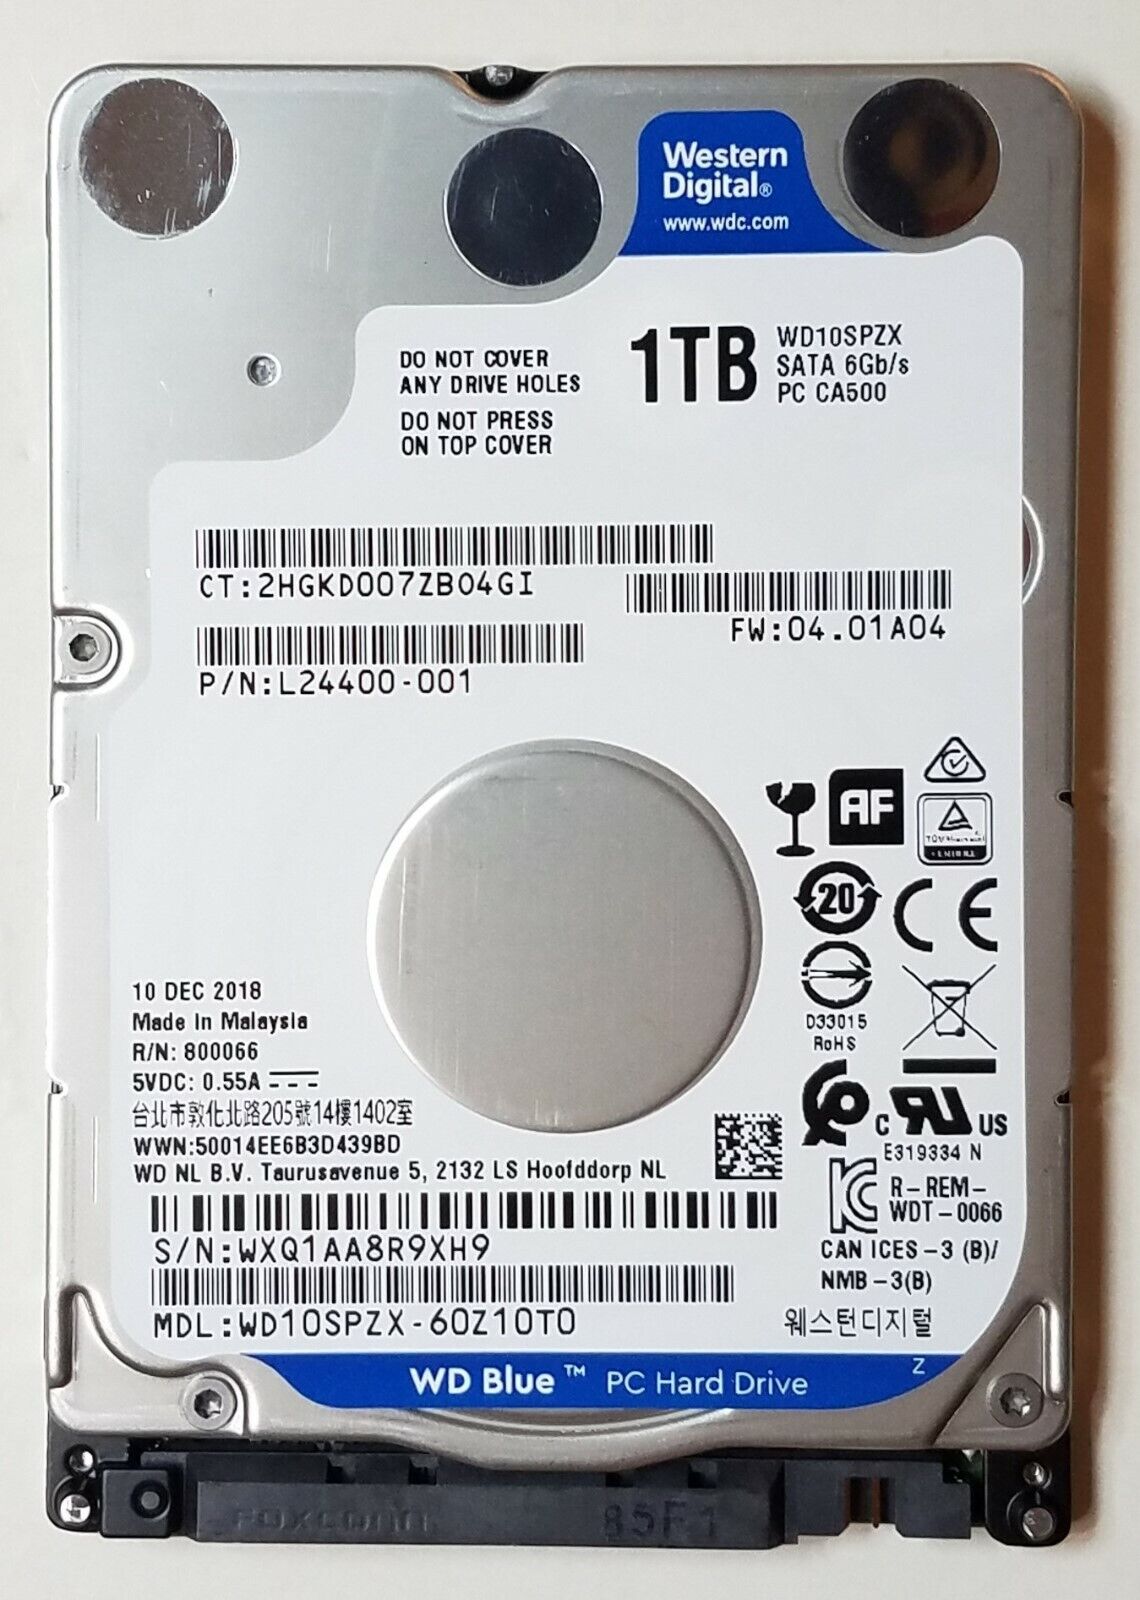 NEW - Genuine HP Pavilion Hard Drive 778192-005 1TB. SELECT ONE FOR YOUR MODEL